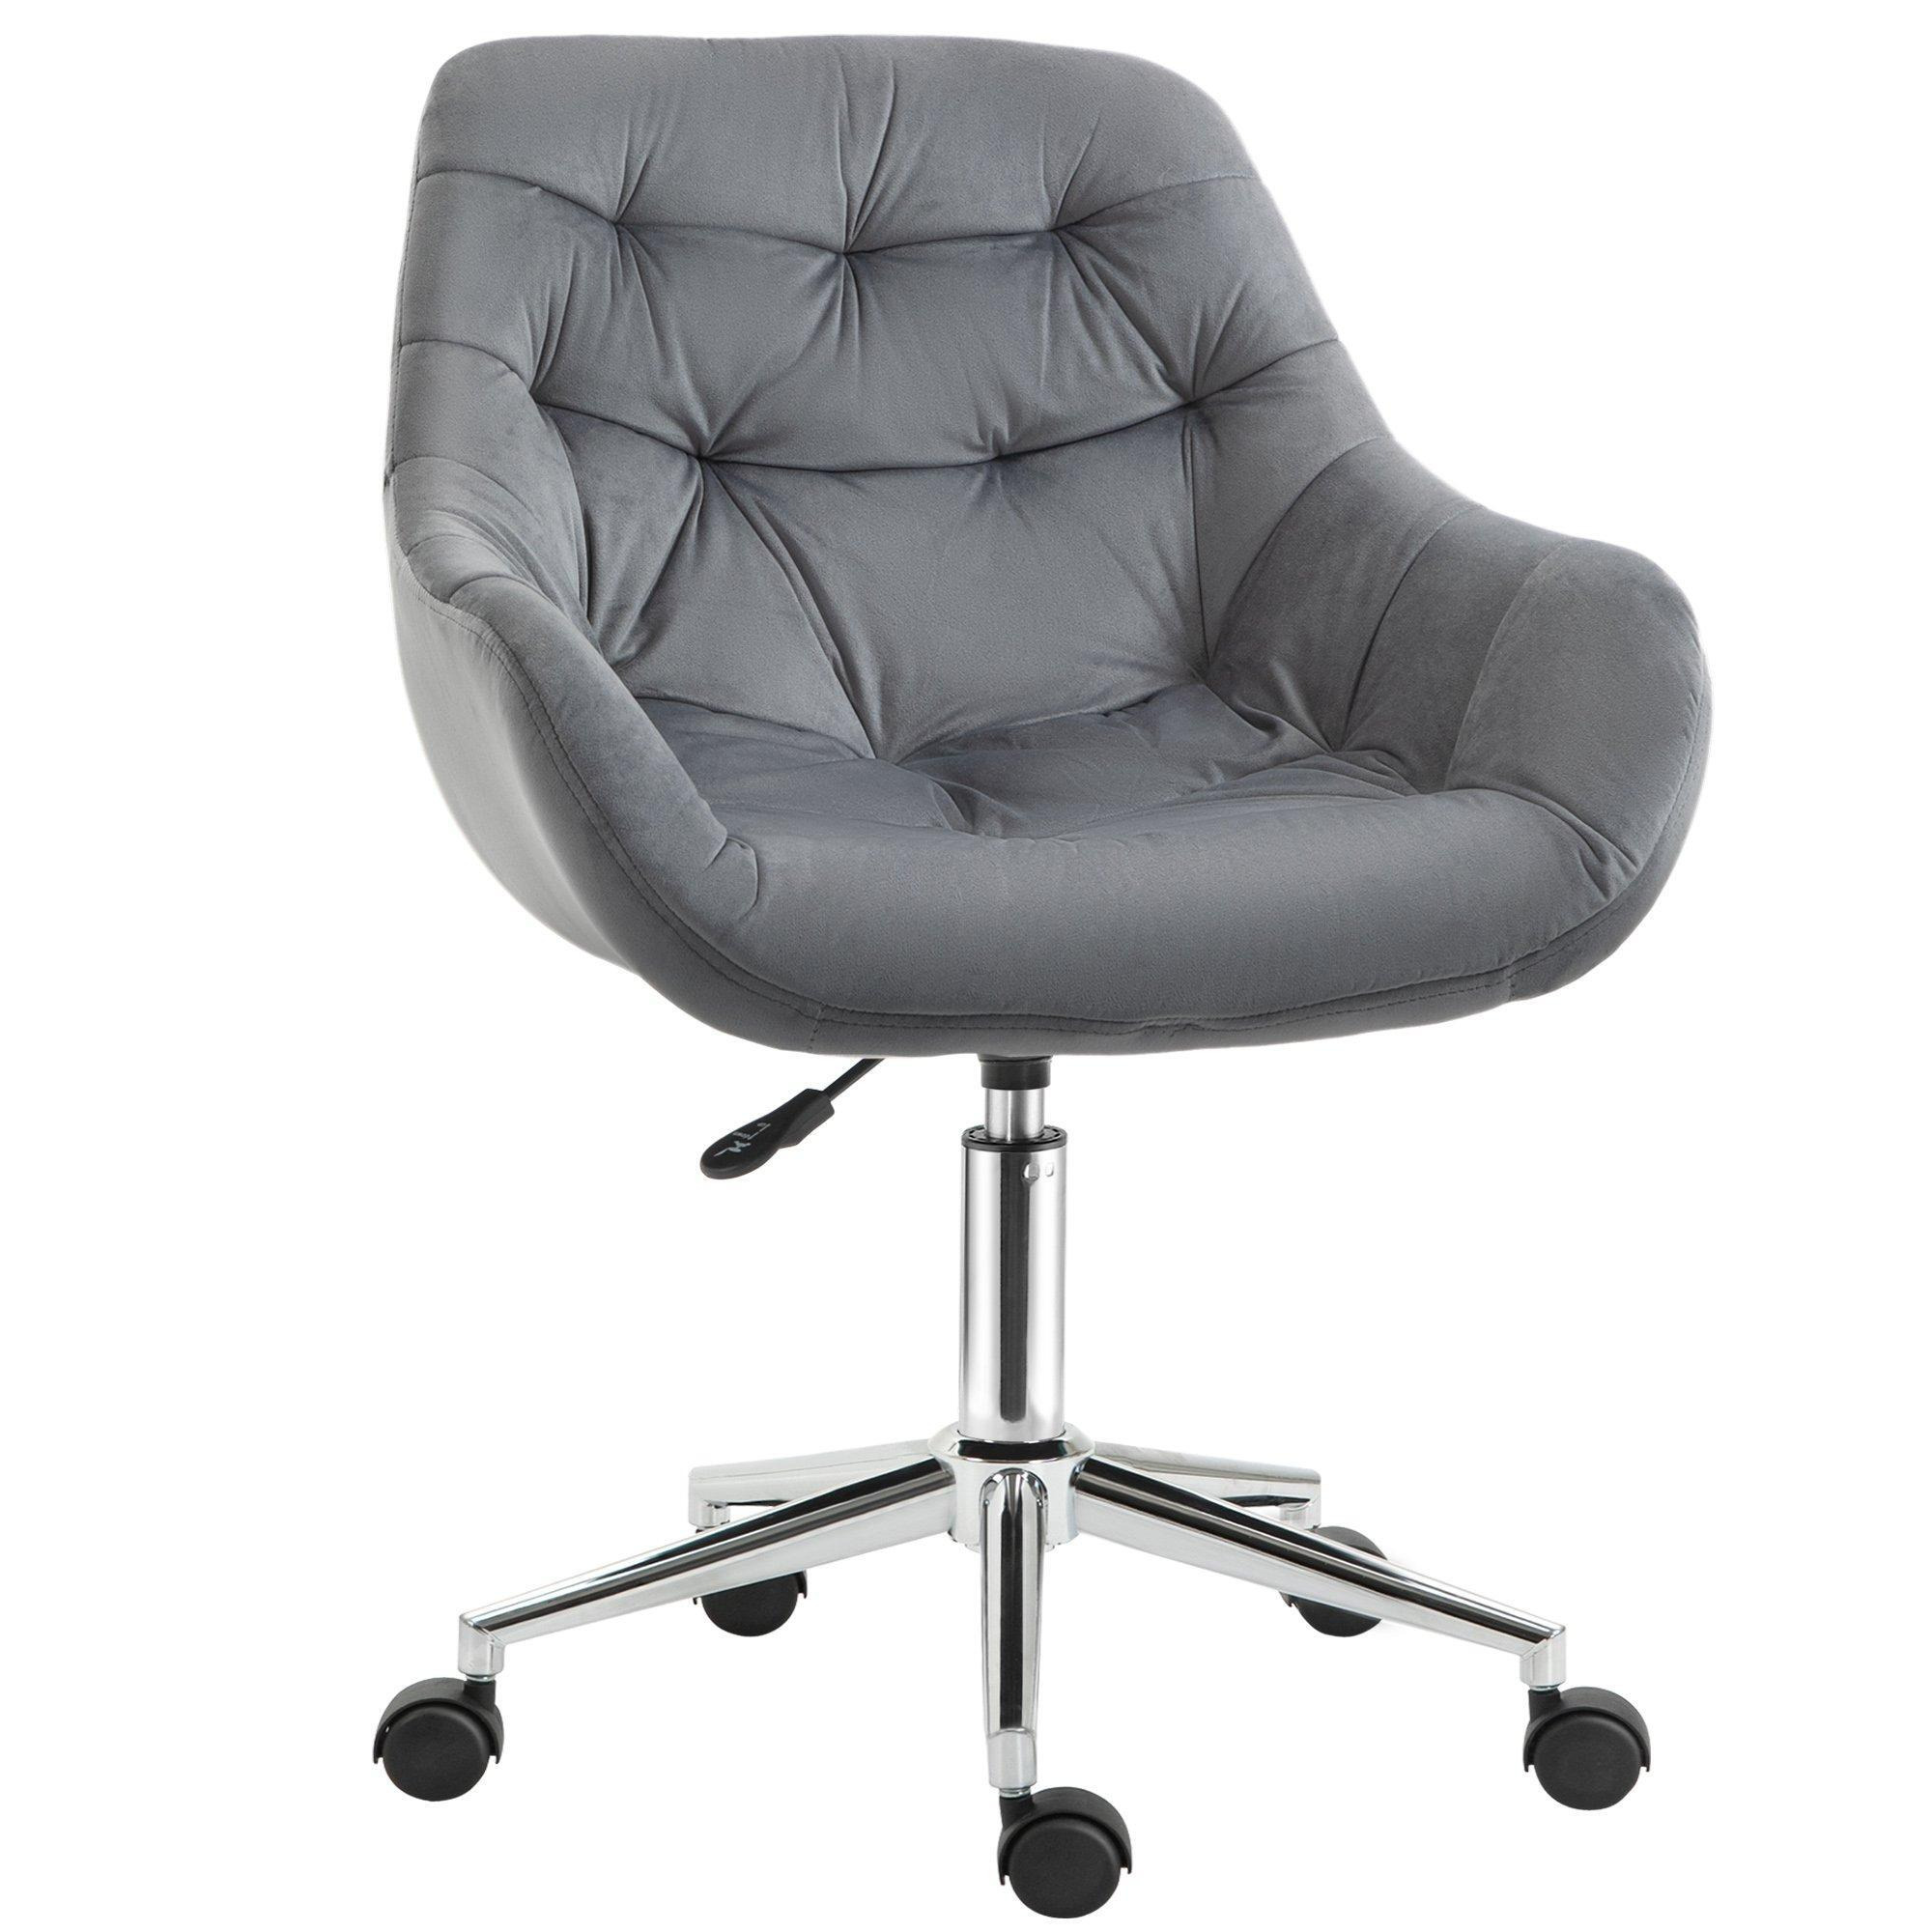 Velvet Home Office Chair Comfy Desk Chair with Adjustable Height - image 1